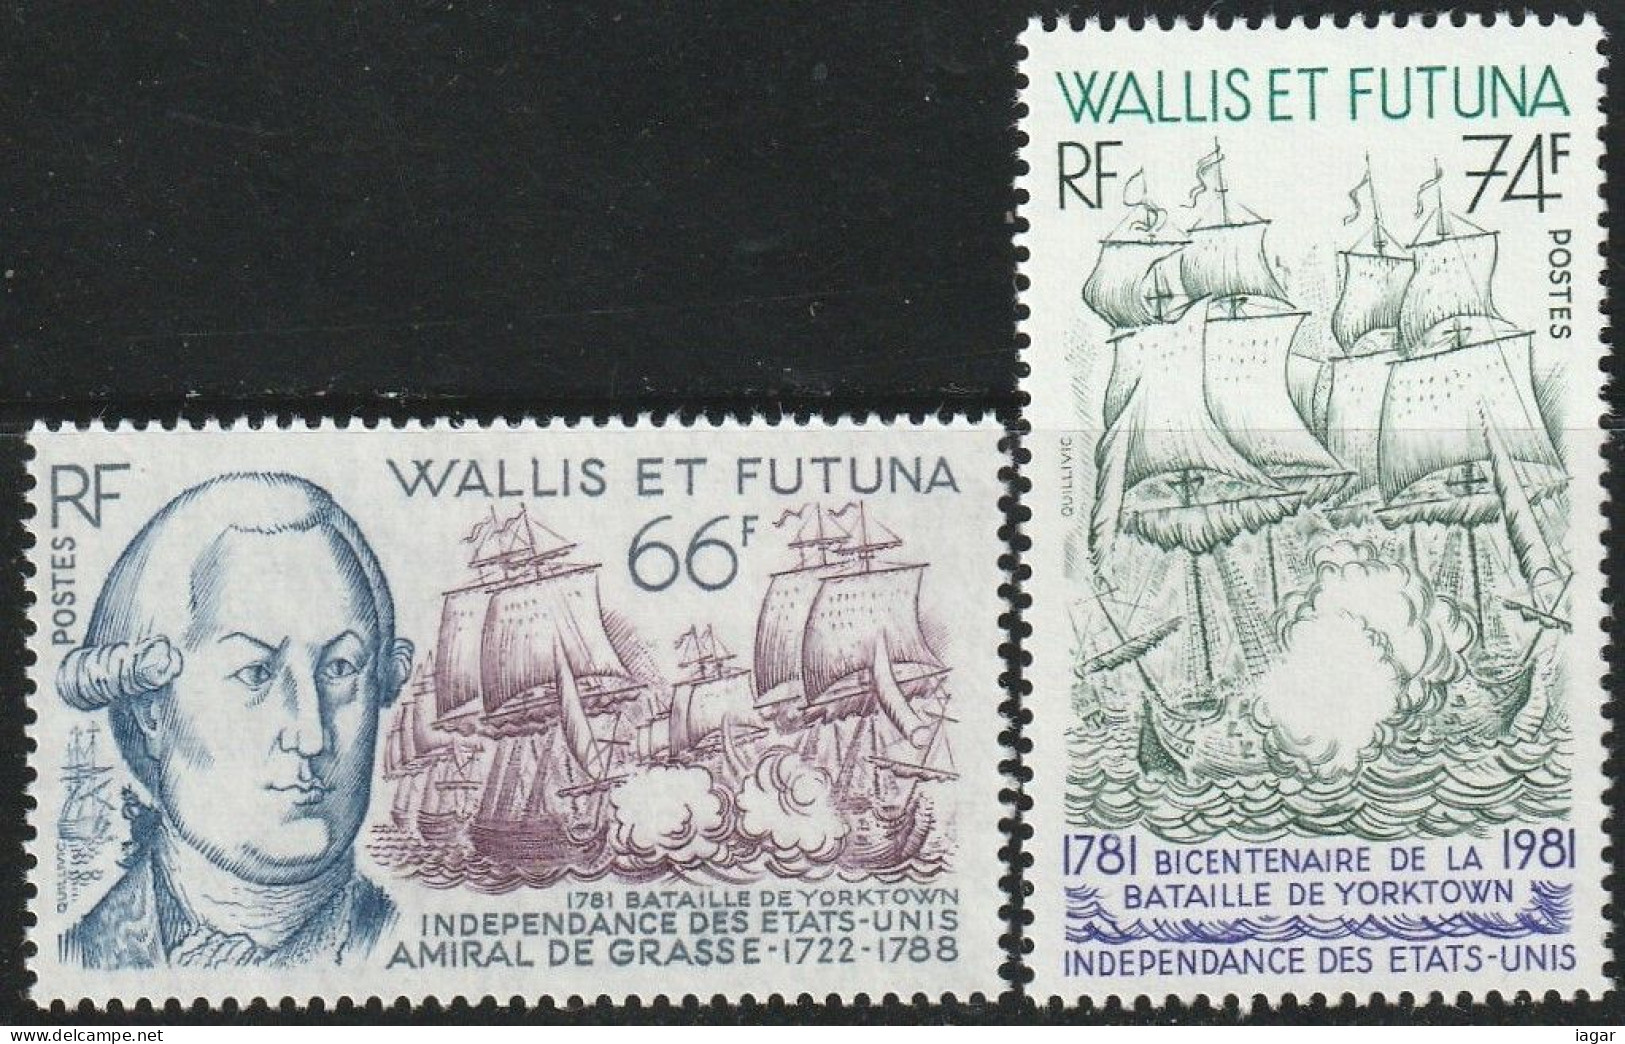 THEMATIC HISTORY:  INDEPENDENCE OF THE UNITED STATES, BATTLE OF YORKTOWN. ASPECTS OF NAVAL BATTLE  -  WALLIS AND FUTUNA - Independecia USA